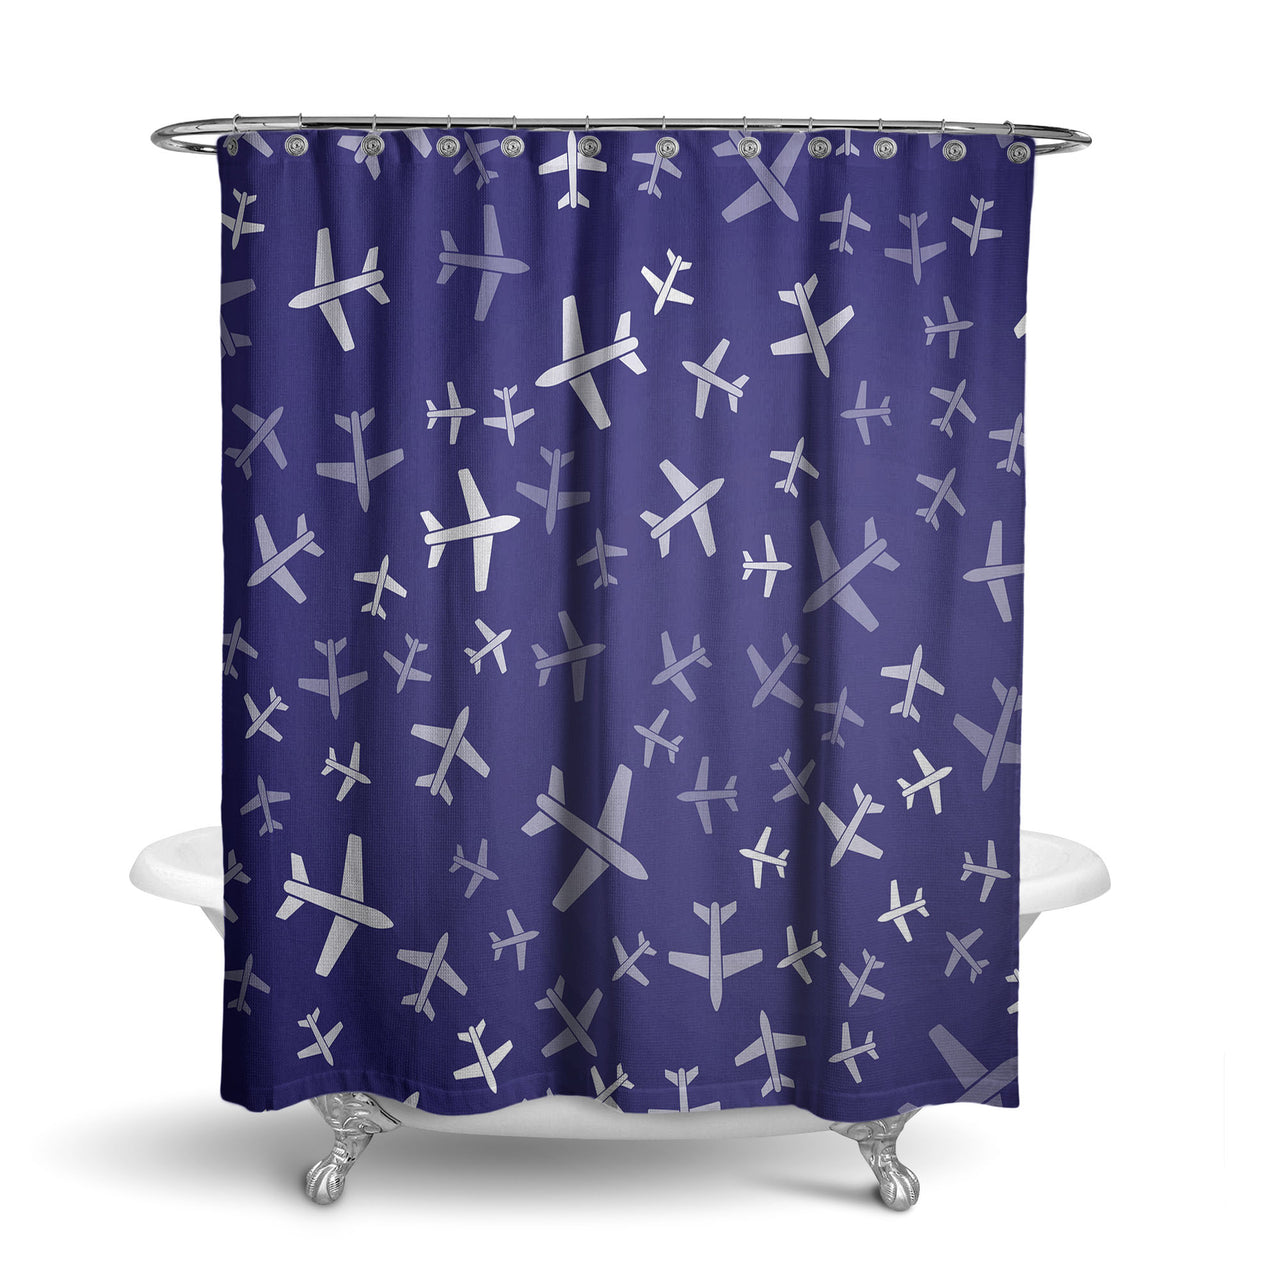 Different Sizes Seamless Airplanes Designed Shower Curtains